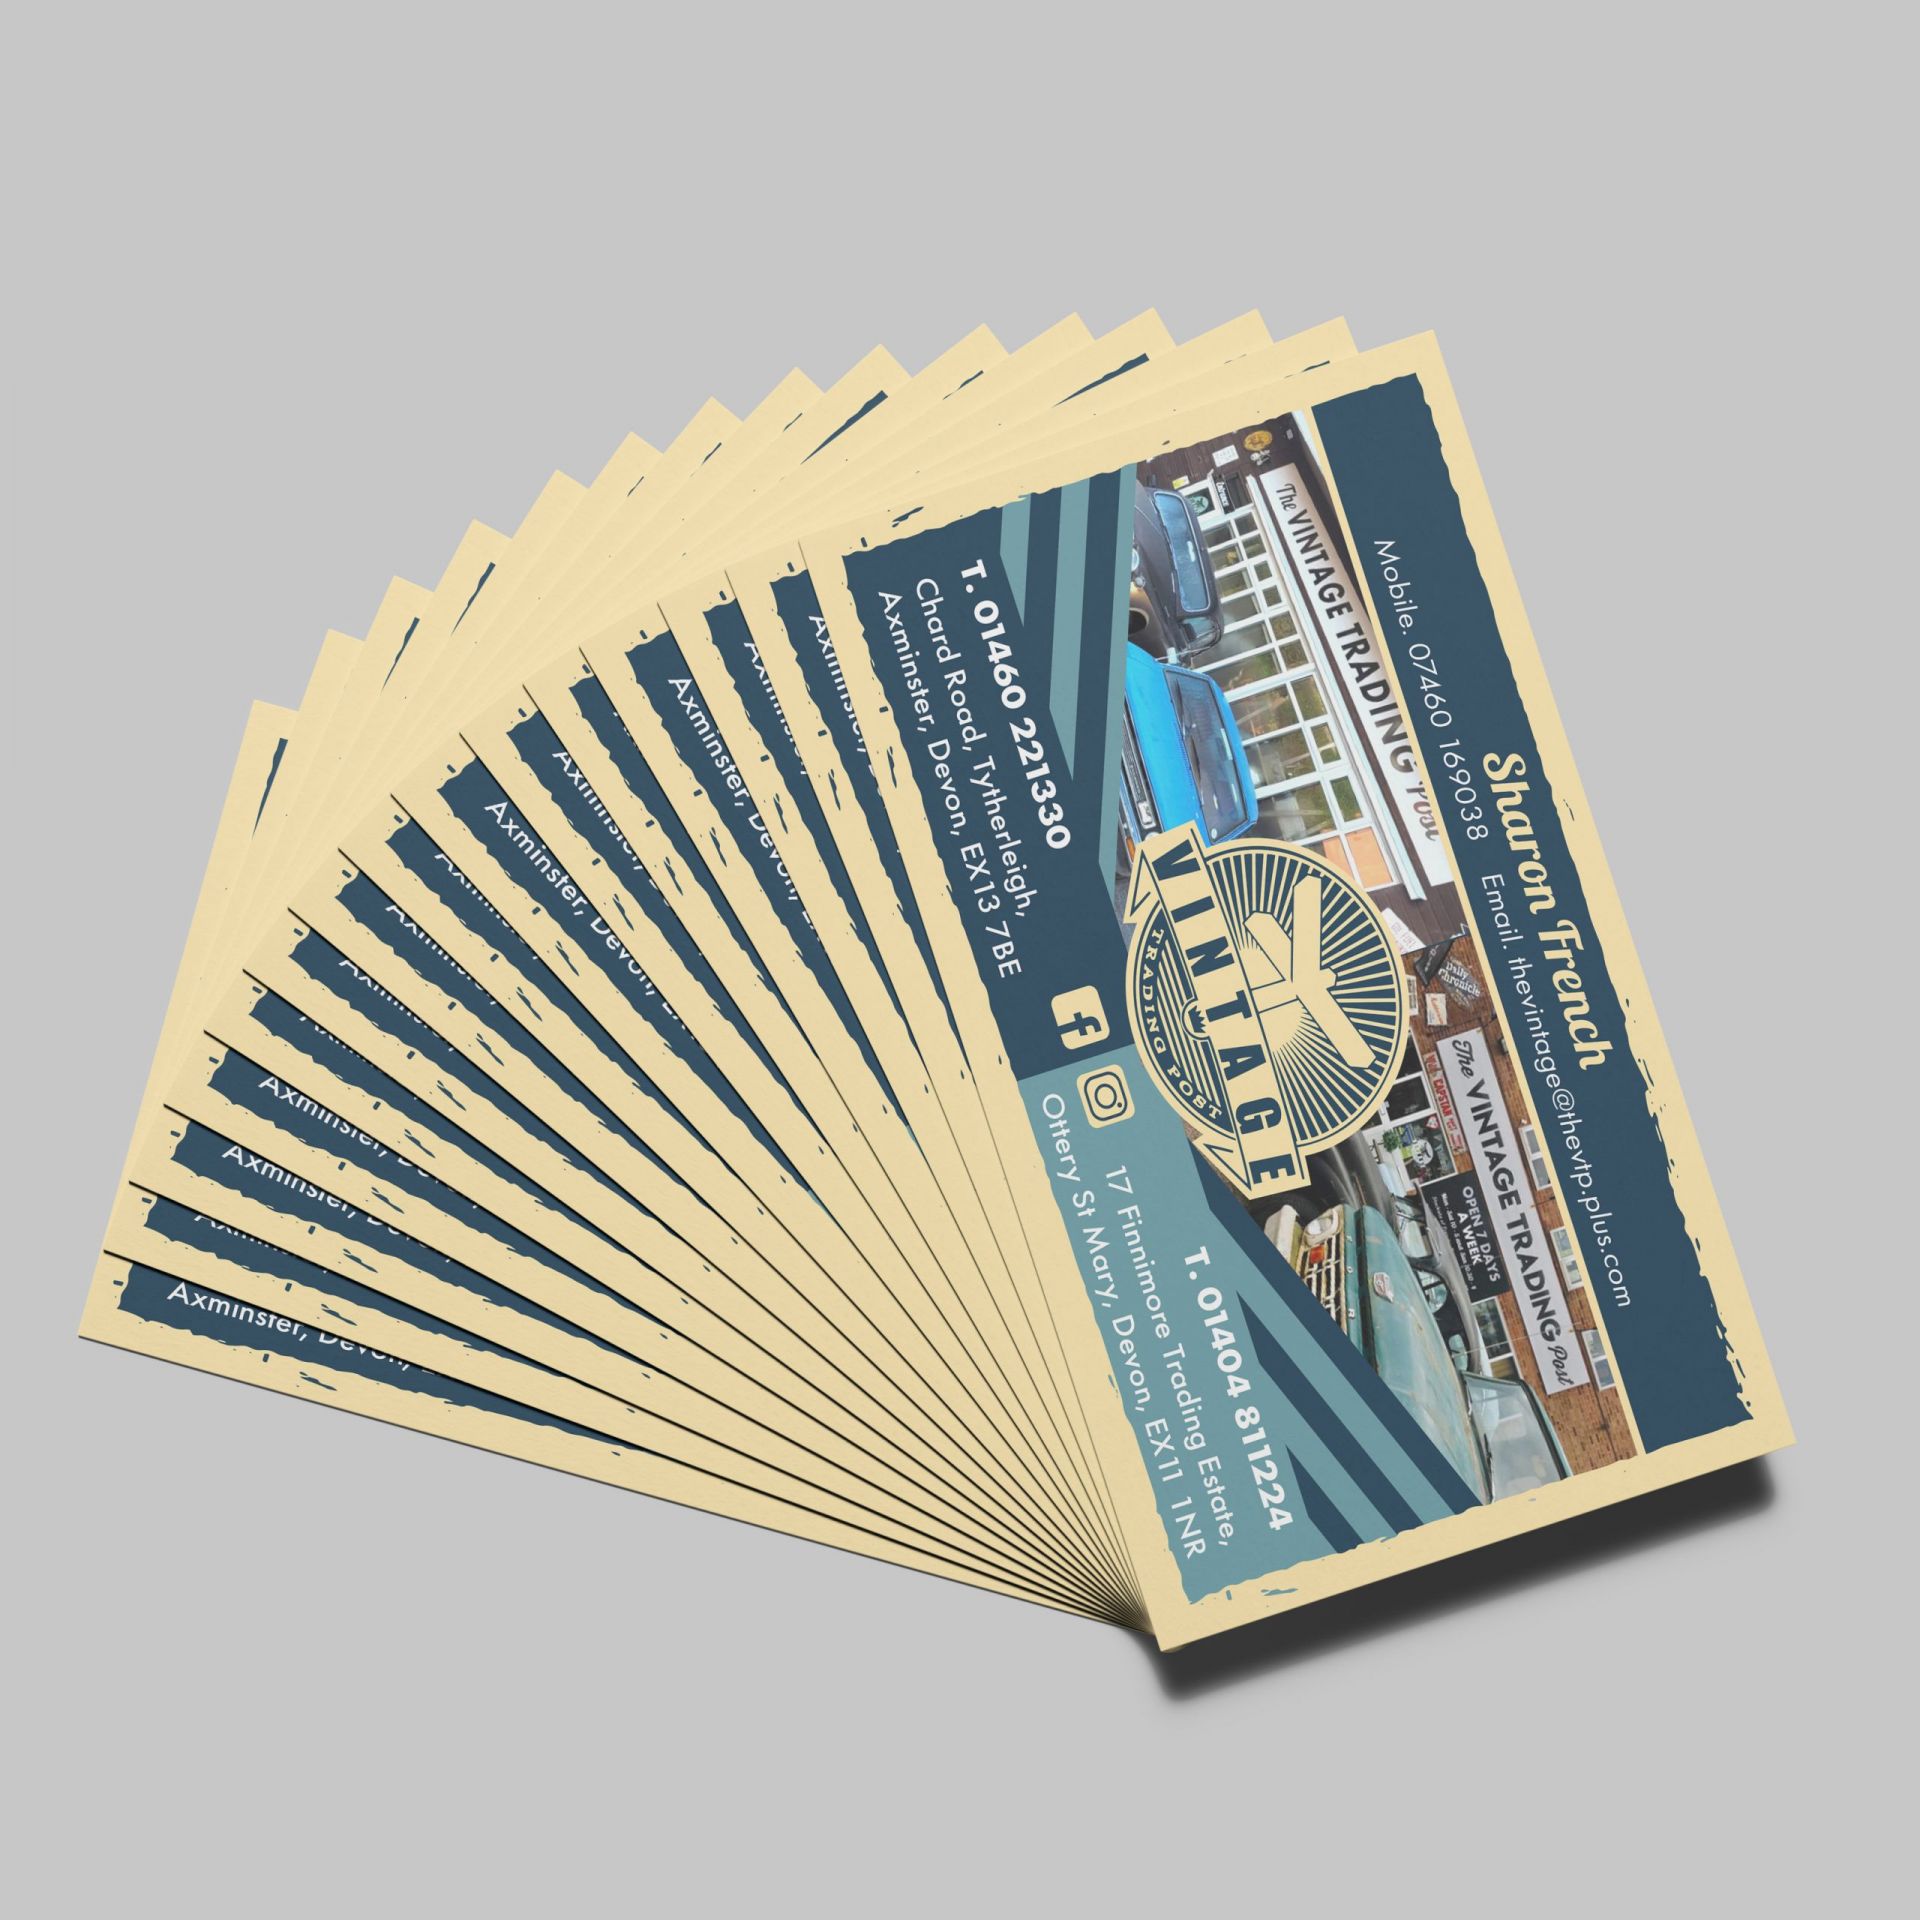 Business cards for the Vintage Trading Post